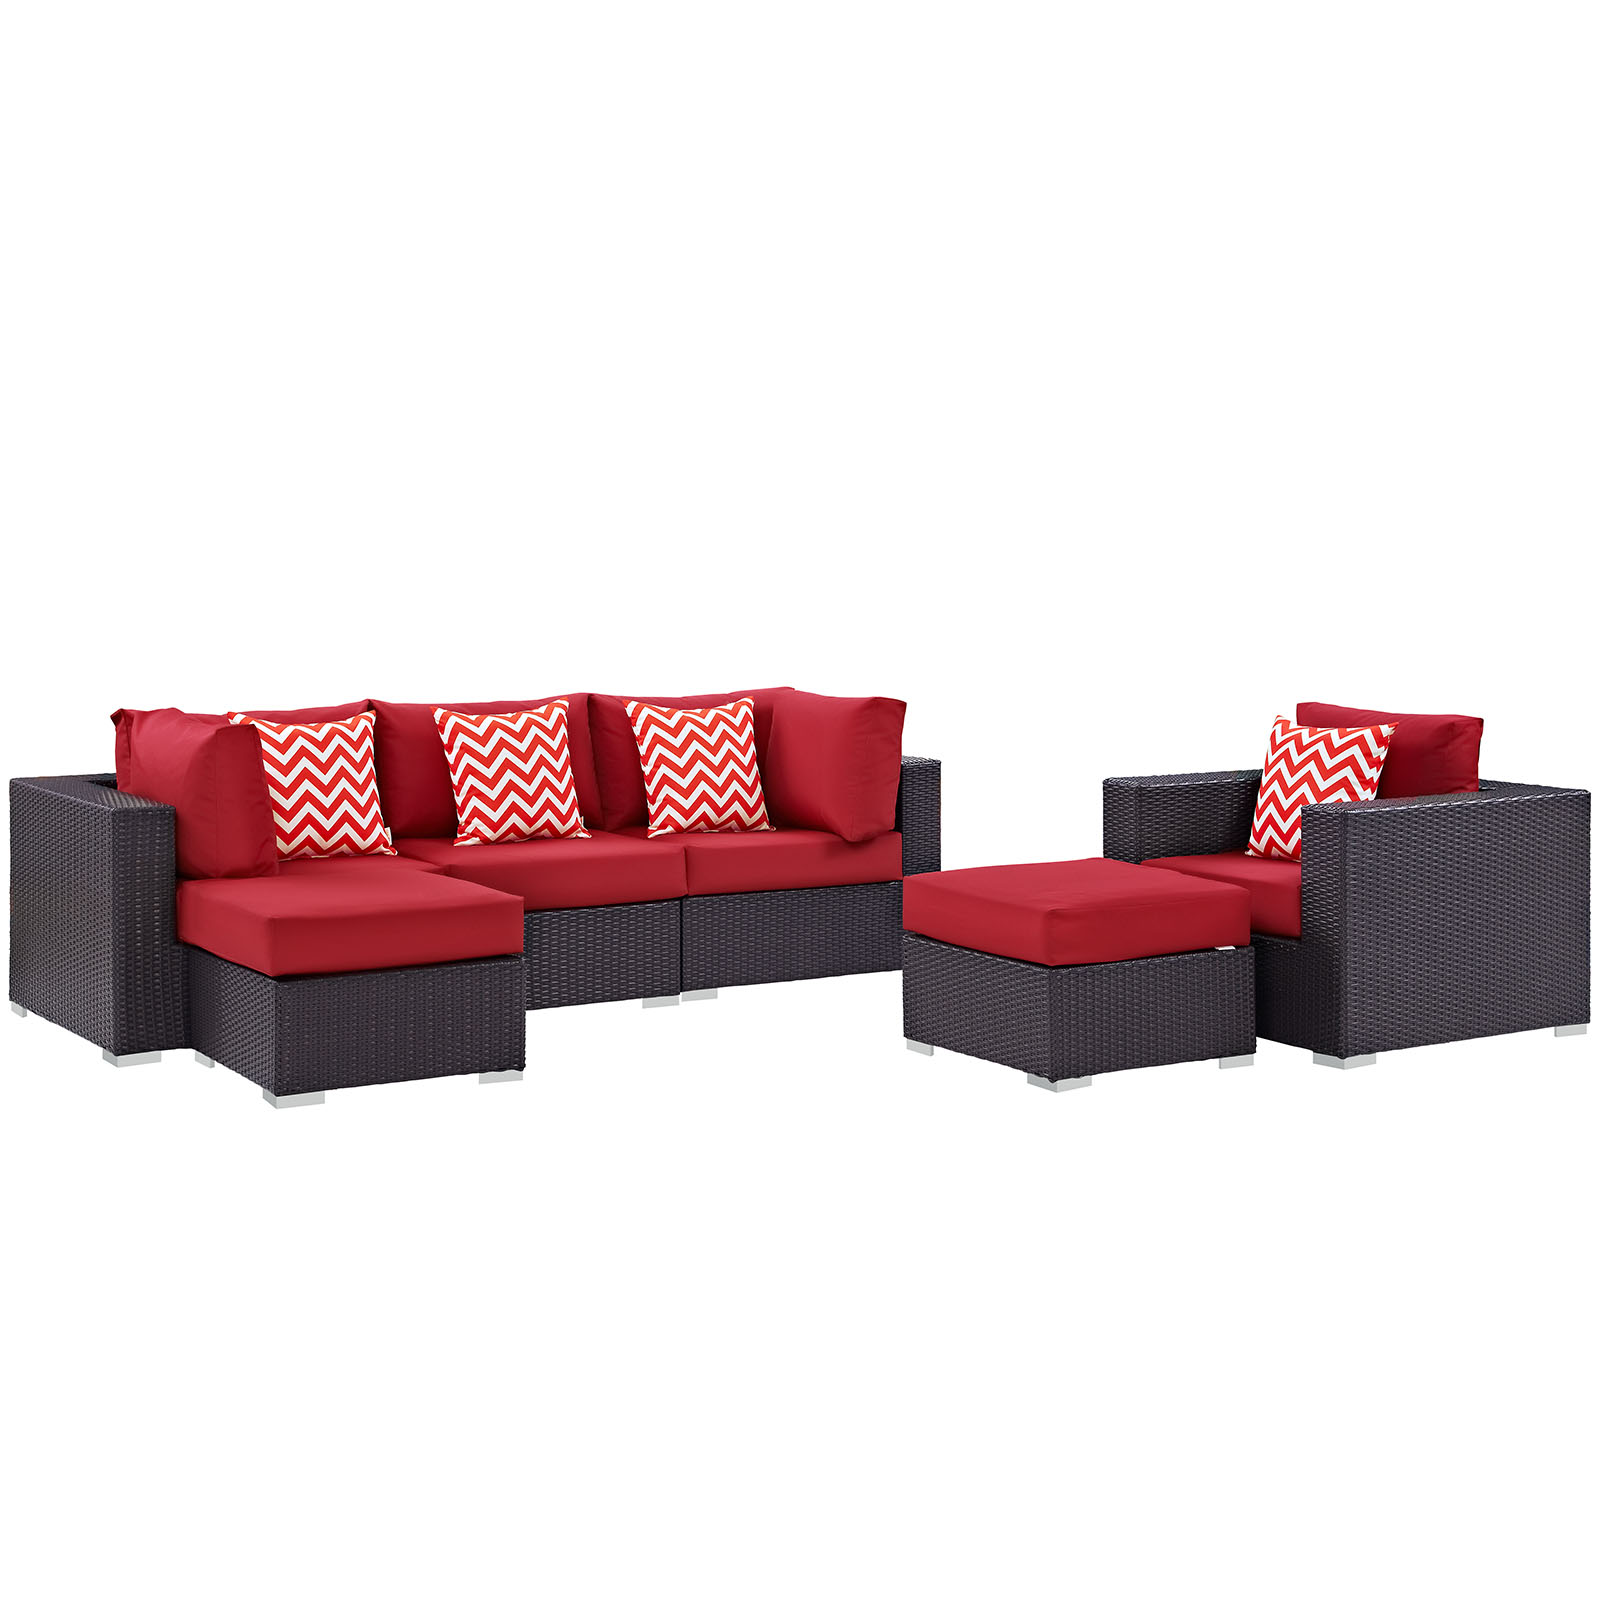 Modway Convene 6 Piece Outdoor Patio Sectional Set in Espresso Red - image 1 of 5